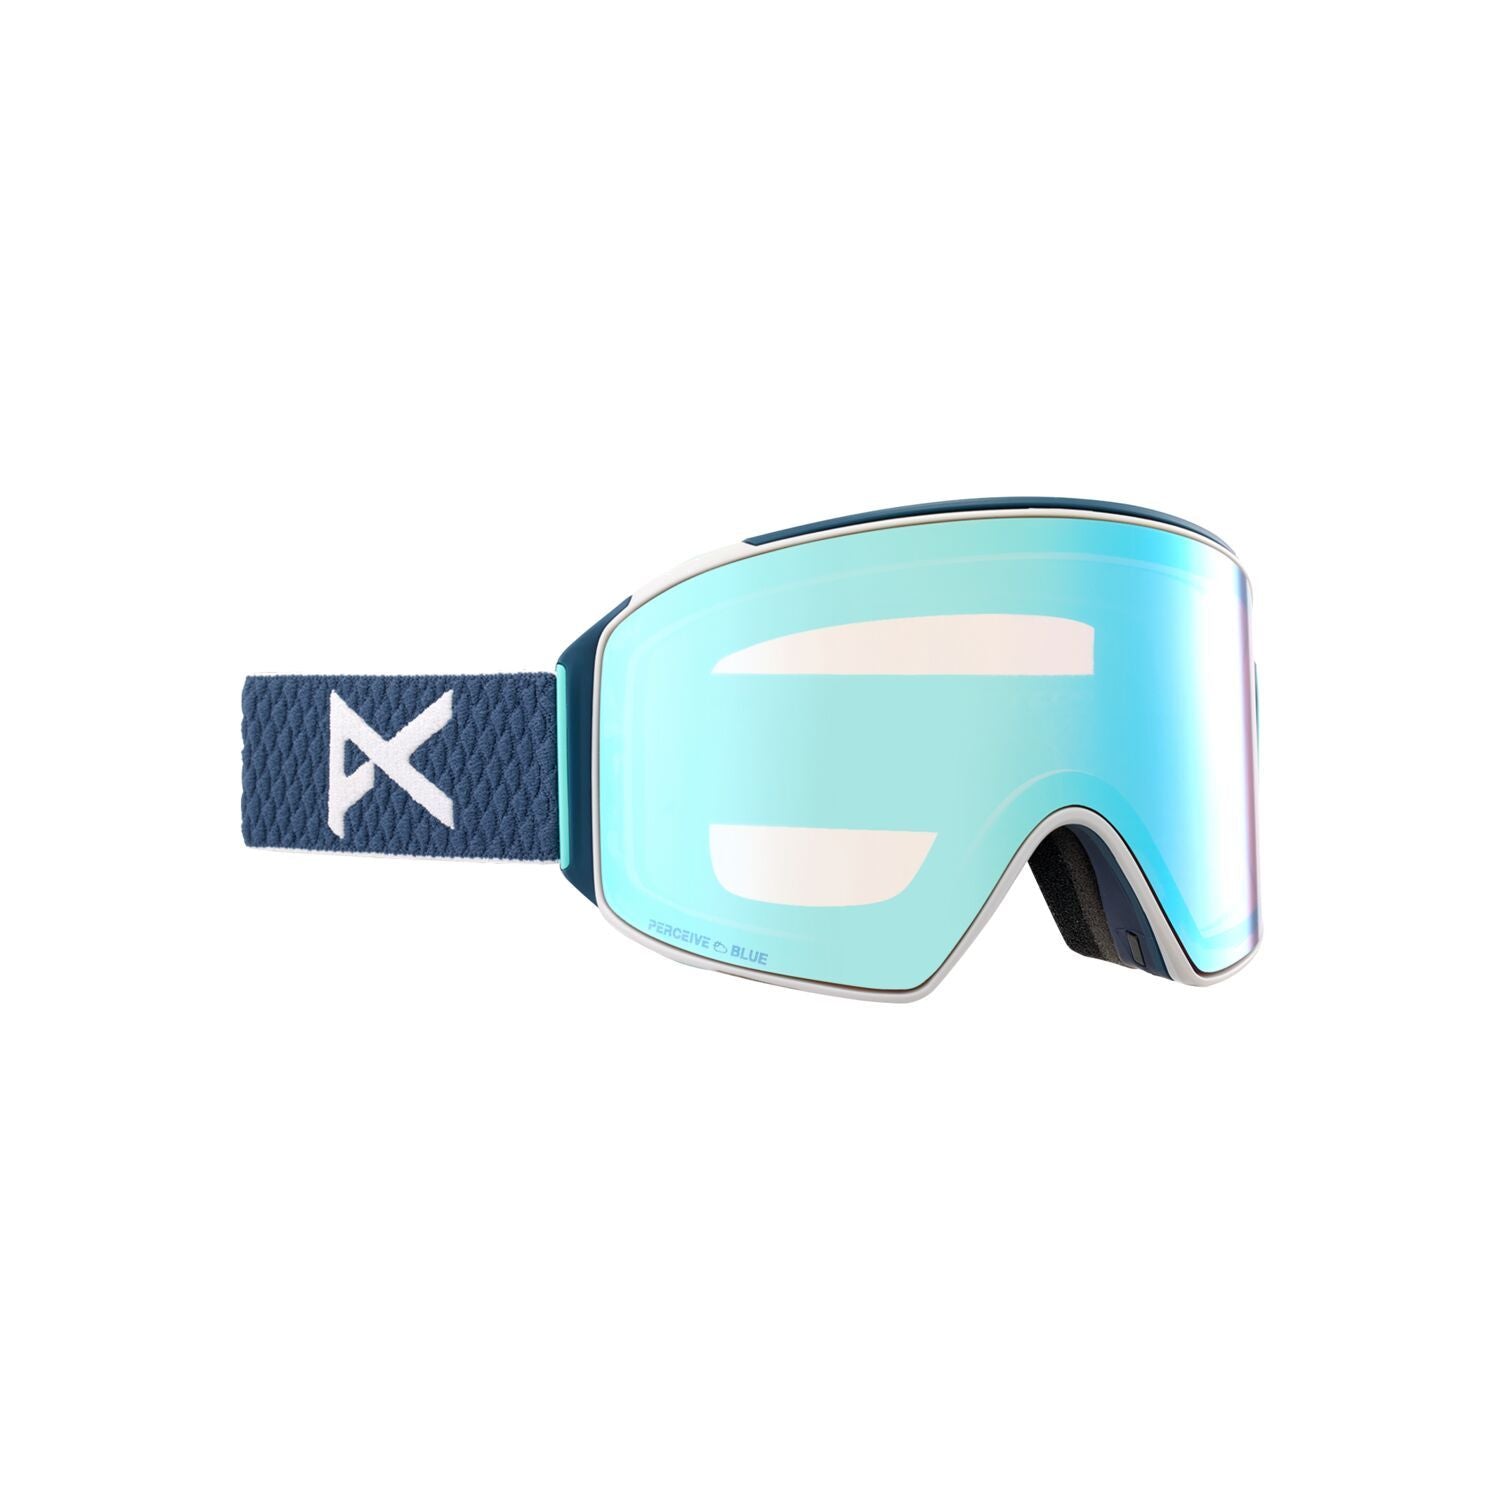 Anon M4 Cylindrical Goggles + Bonus Lens + MFI Face Mask - Low Bridge Fit Nightfall / Perceive Variable Blue Snow Goggles